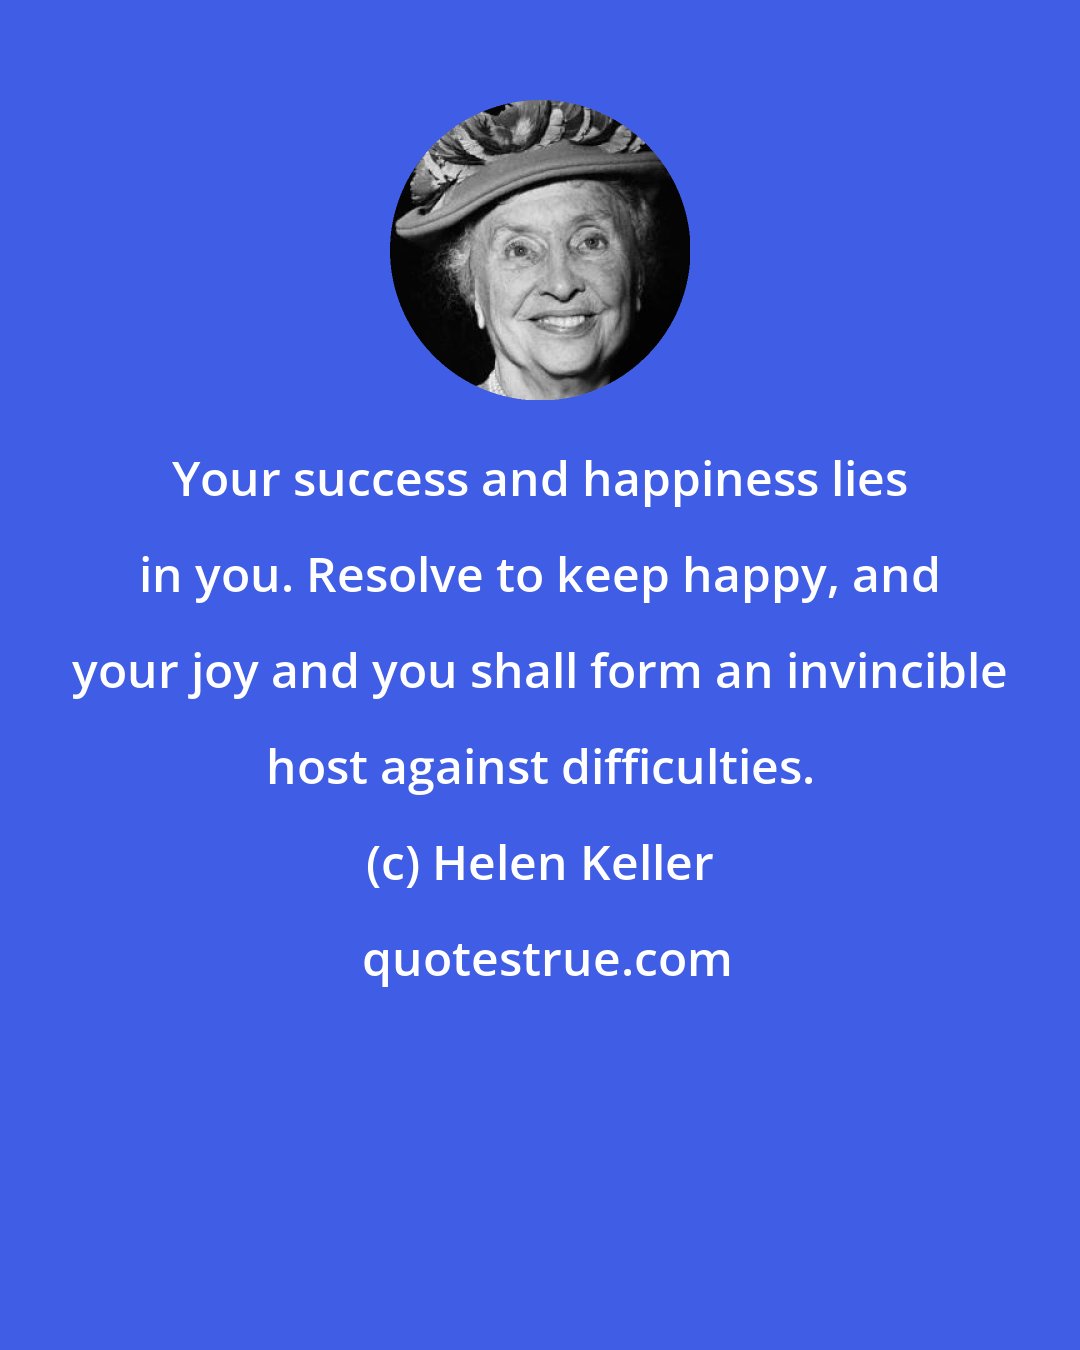 Helen Keller: Your success and happiness lies in you. Resolve to keep happy, and your joy and you shall form an invincible host against difficulties.